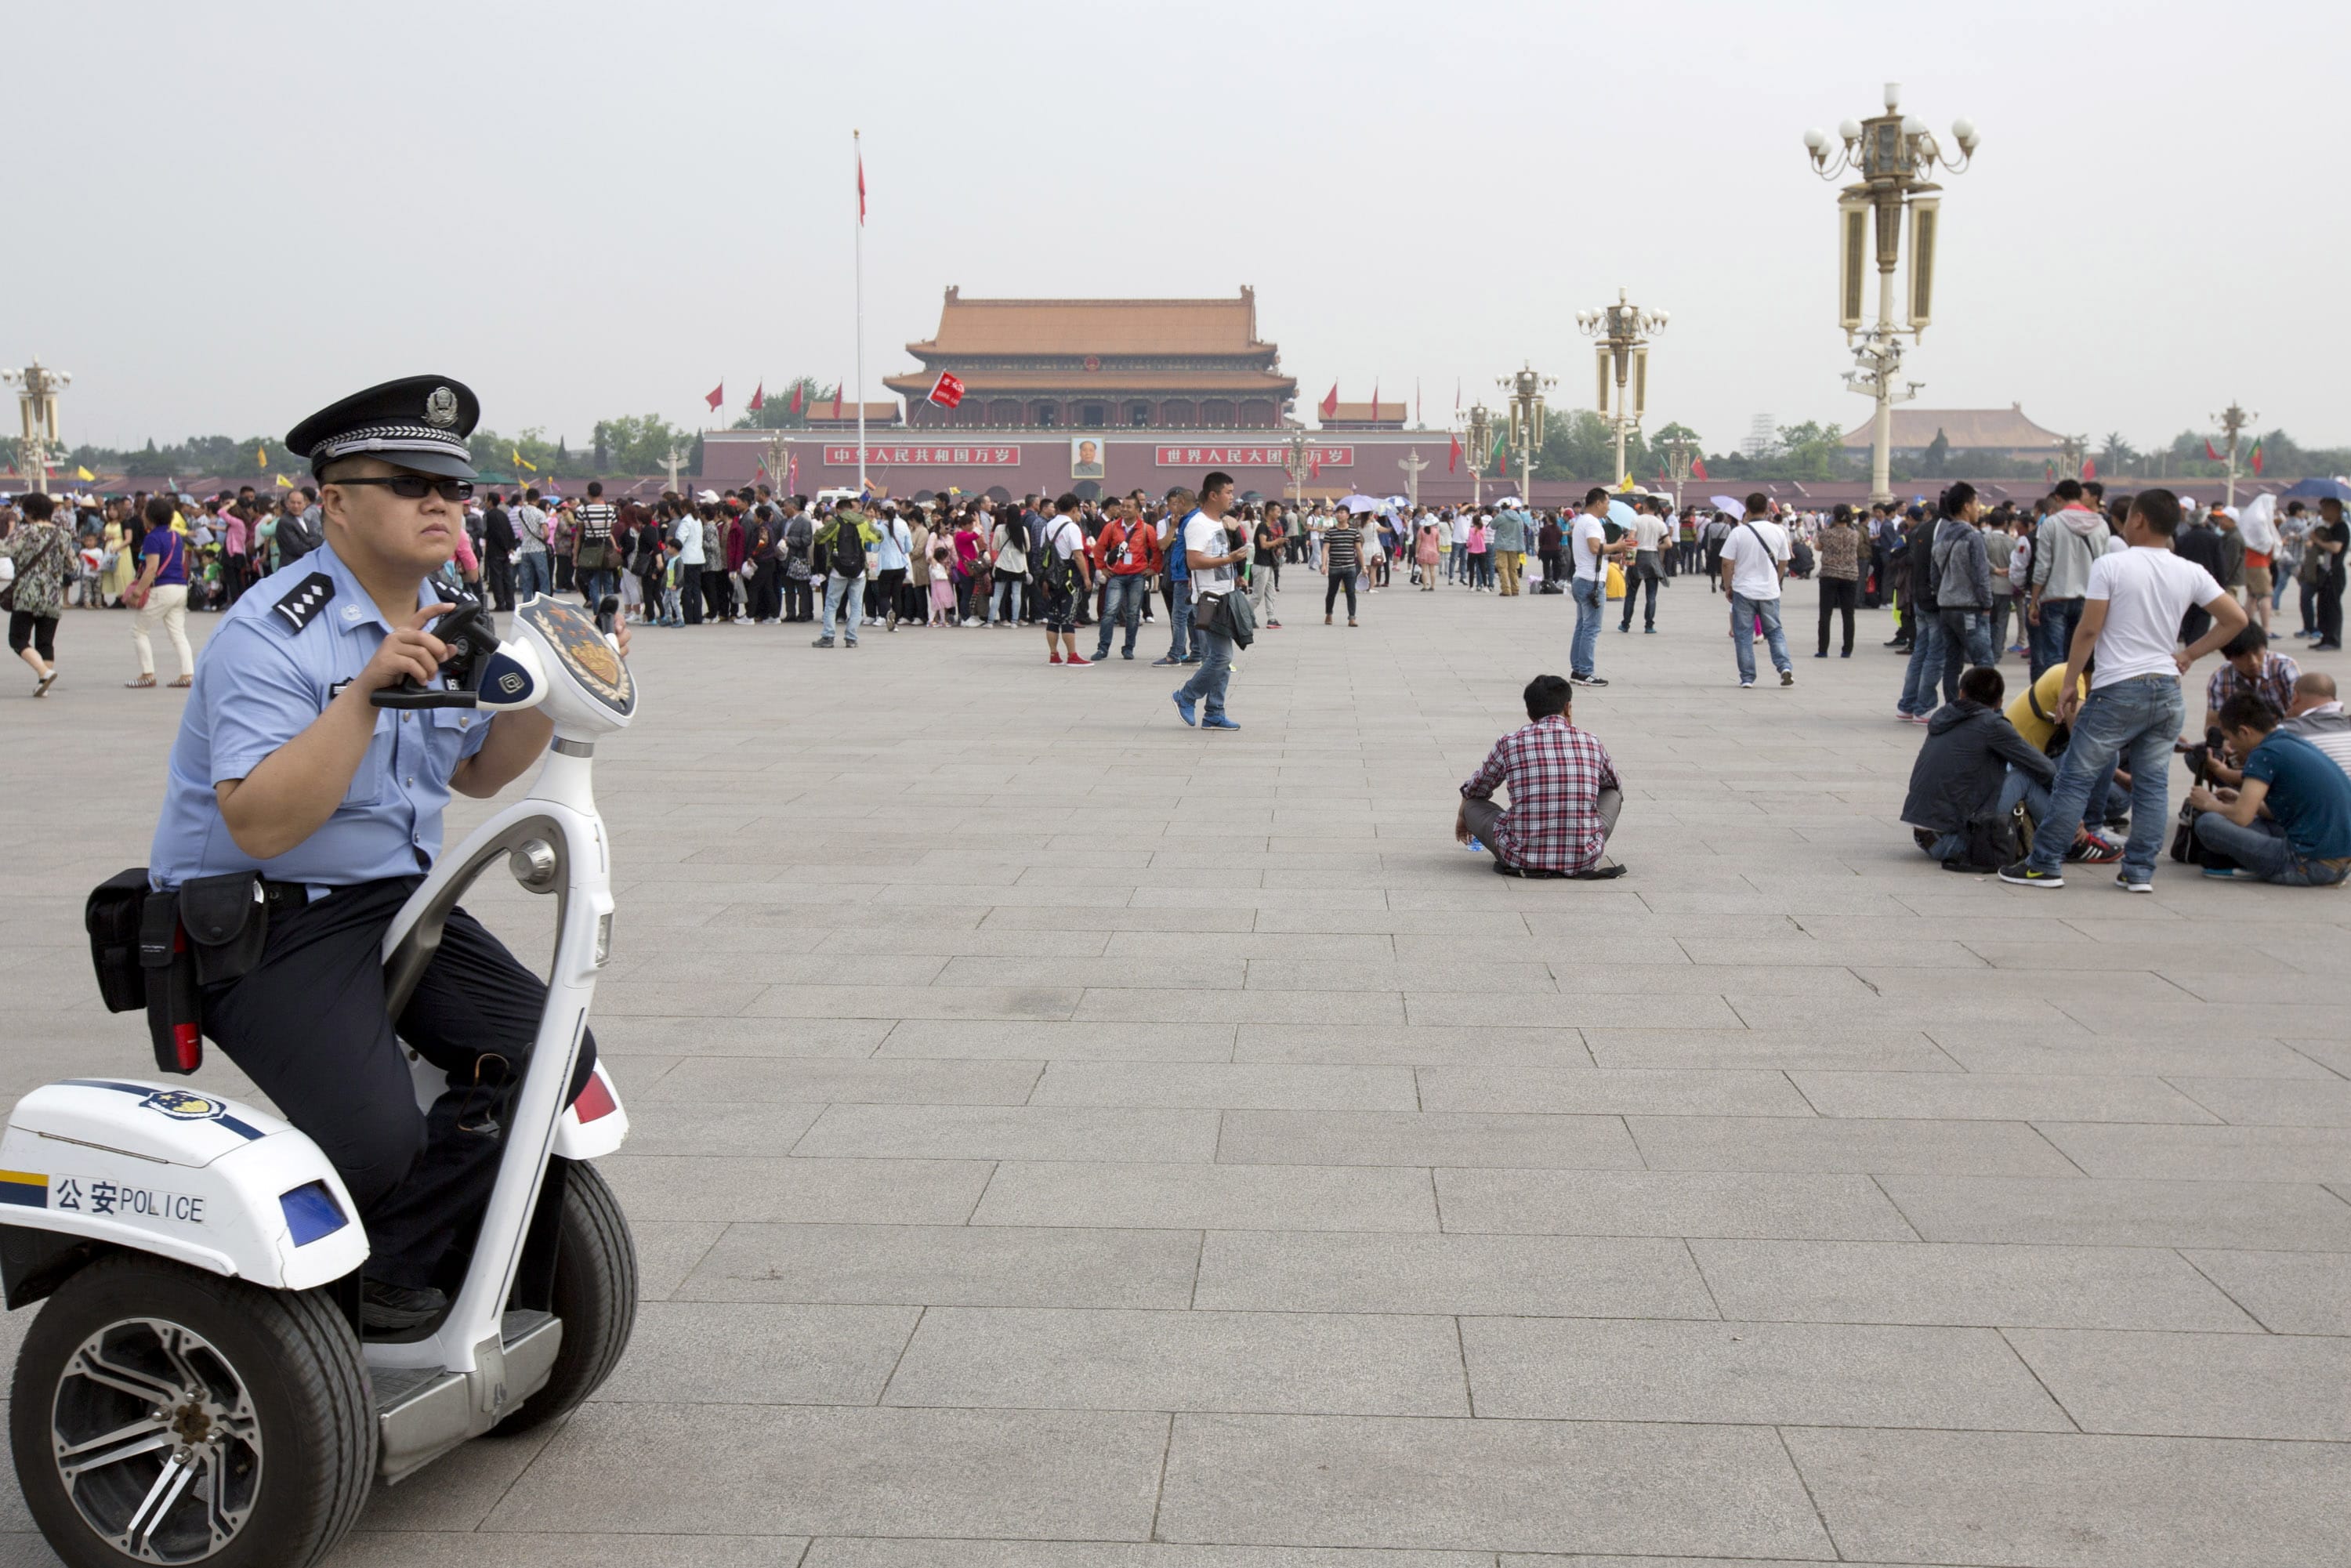 A policeman patrols Tiananmen Square in Beijing on an electric personal transporter on May 17.